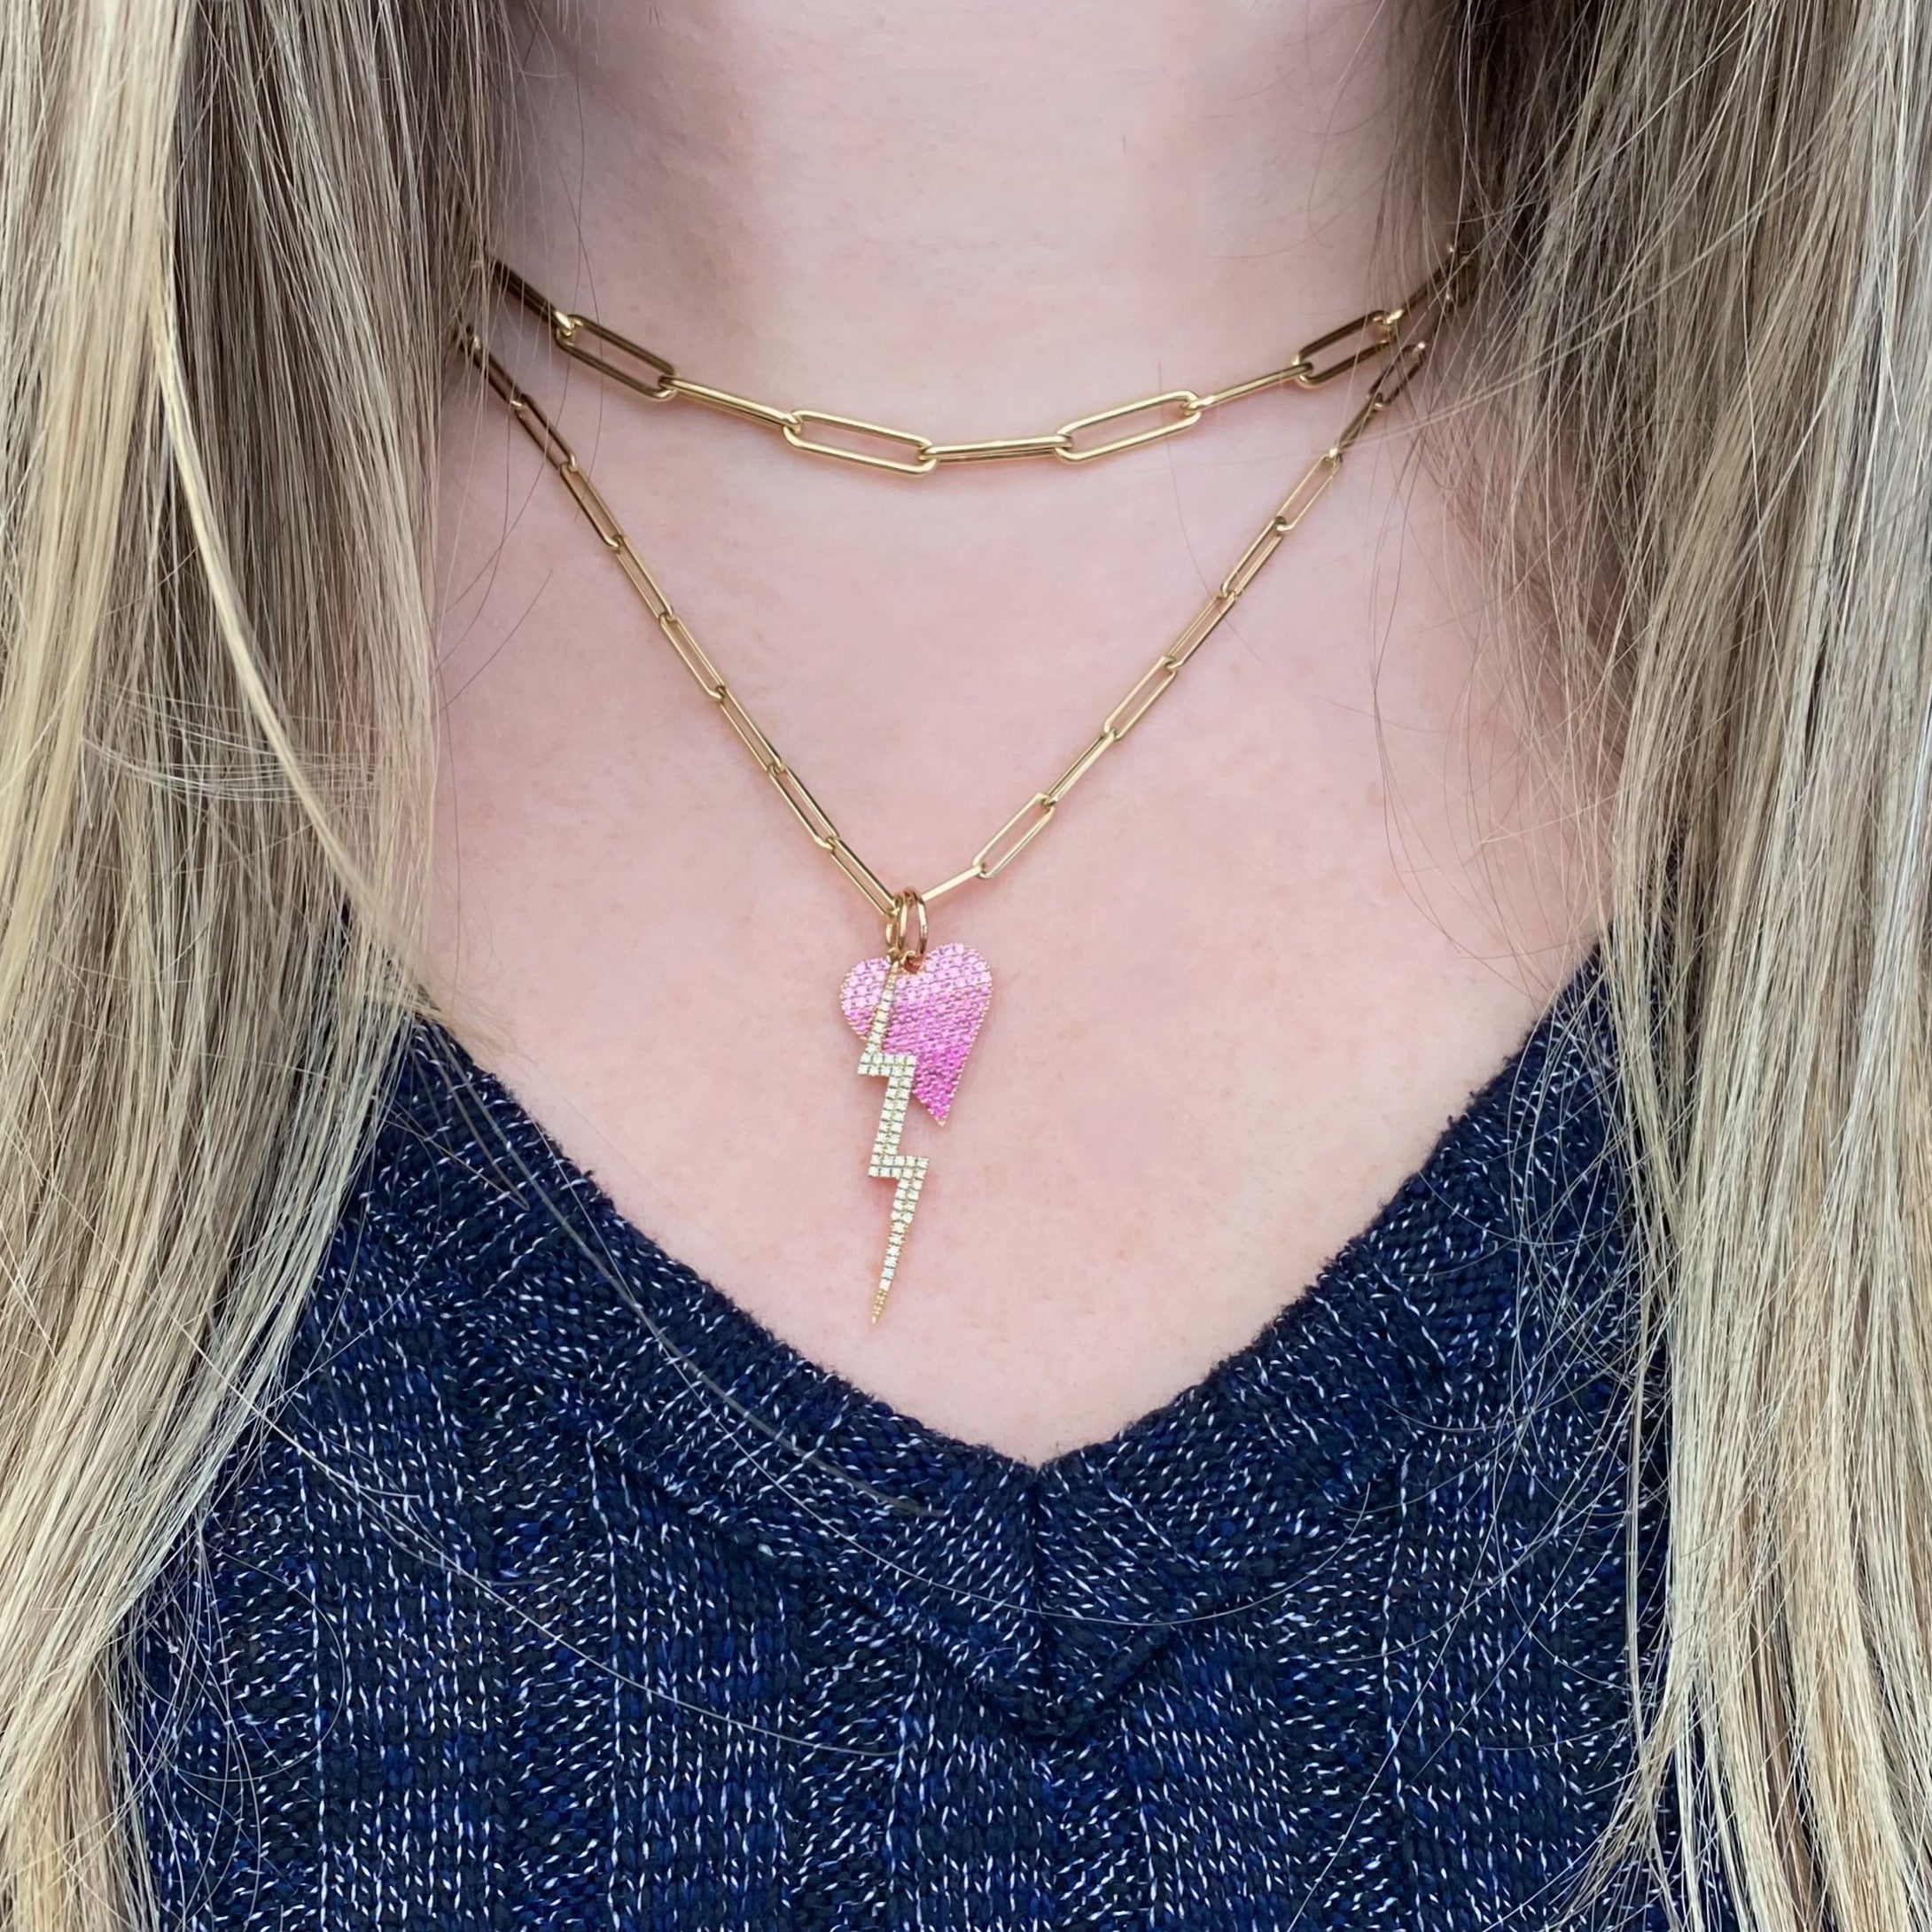 Ombre Pink Sapphire Necklace